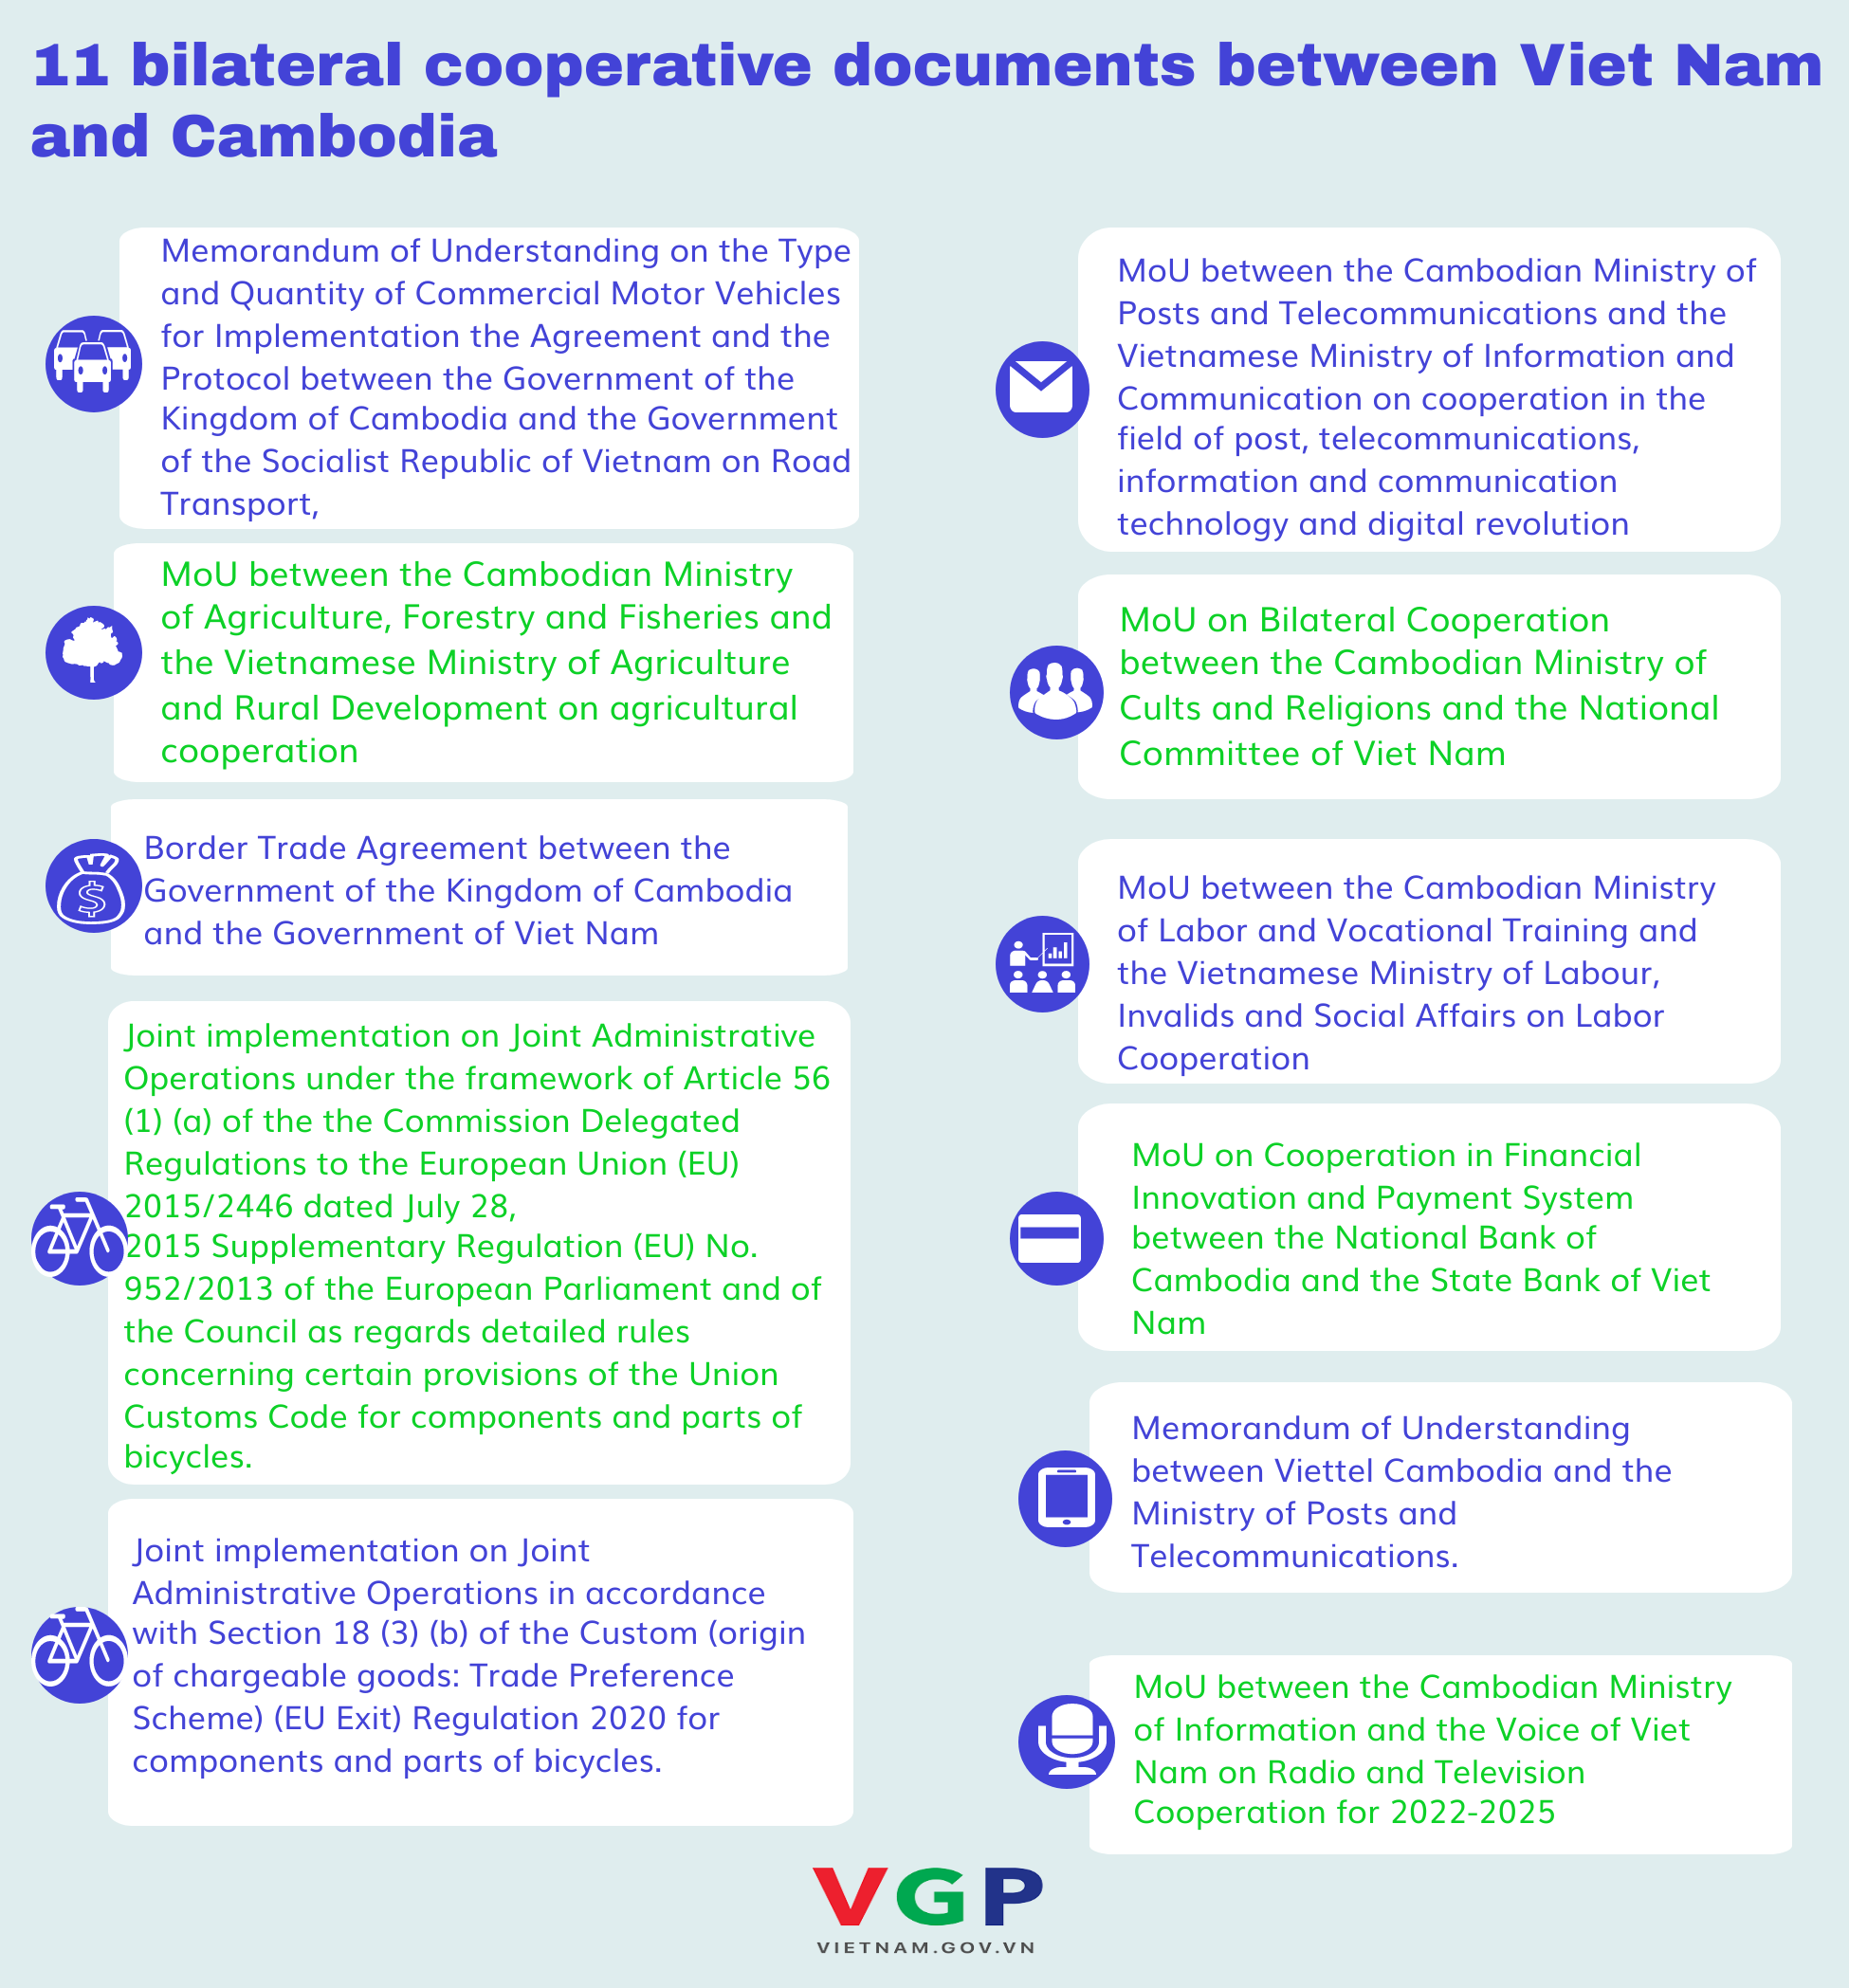 vn-cambodia-ink-11-cooperative-documents-e1cd010169314efb9c87b976fc52b321.png